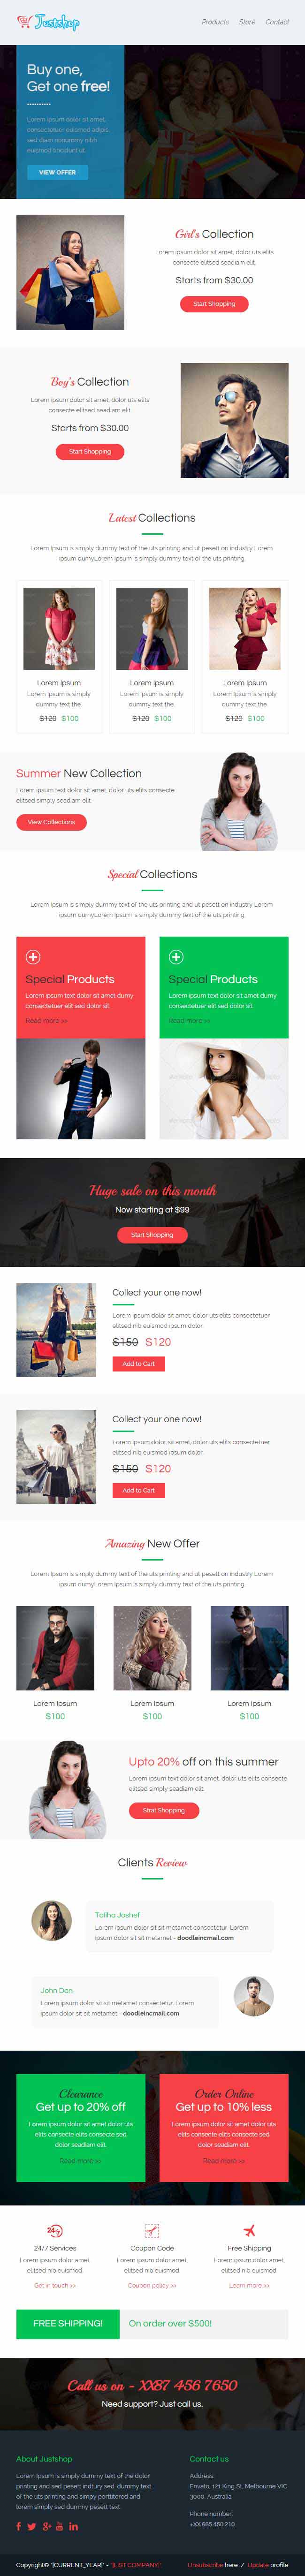 Justshop professional responsive email template